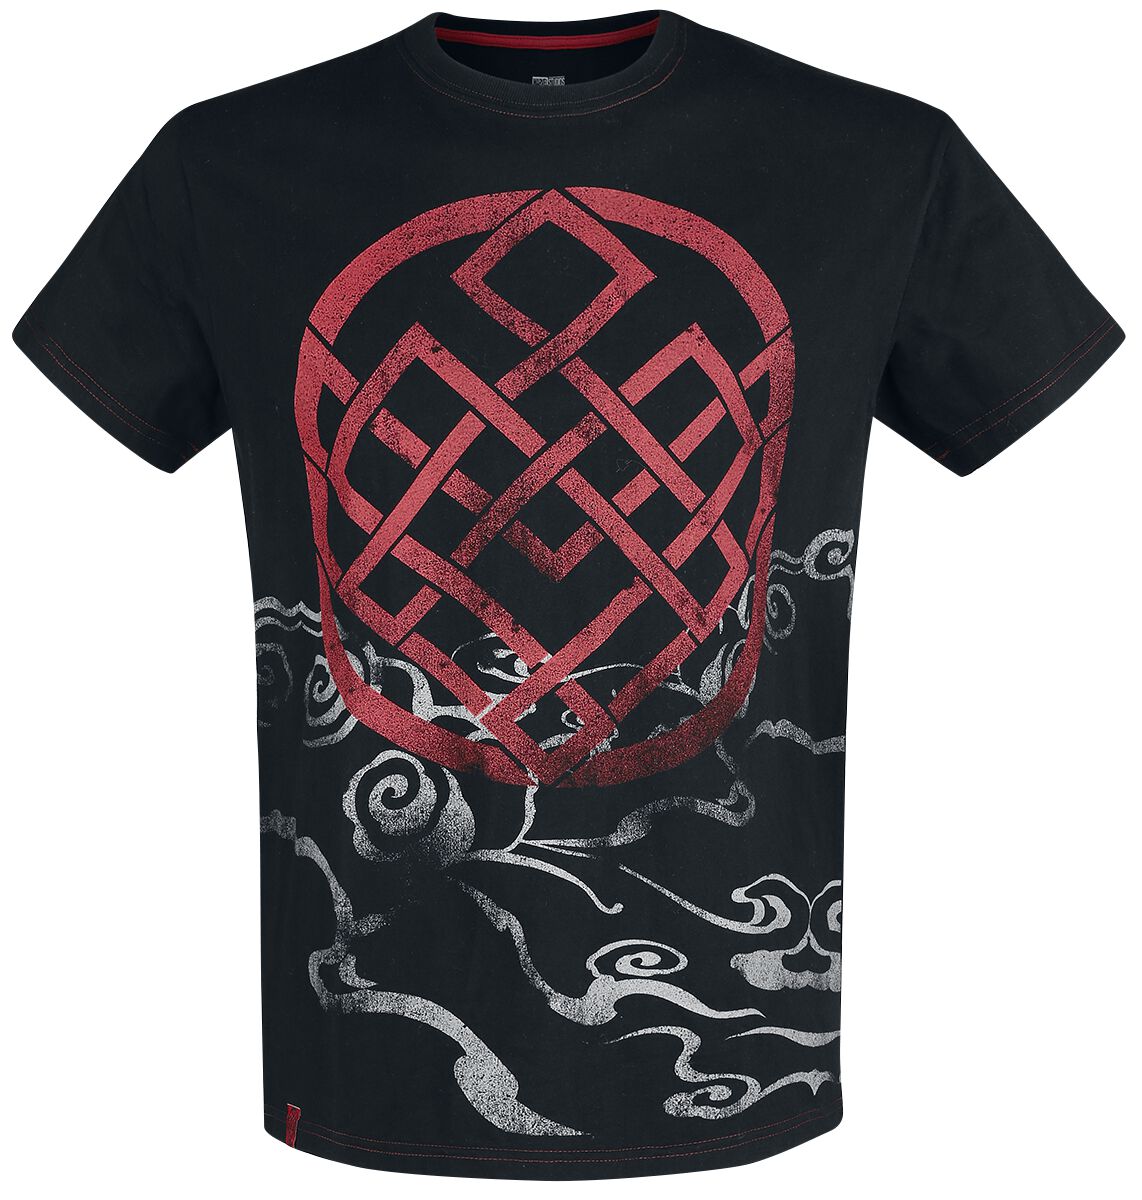 Shang-Chi and the Legend of the Ten Rings Ornament T-Shirt dark grey